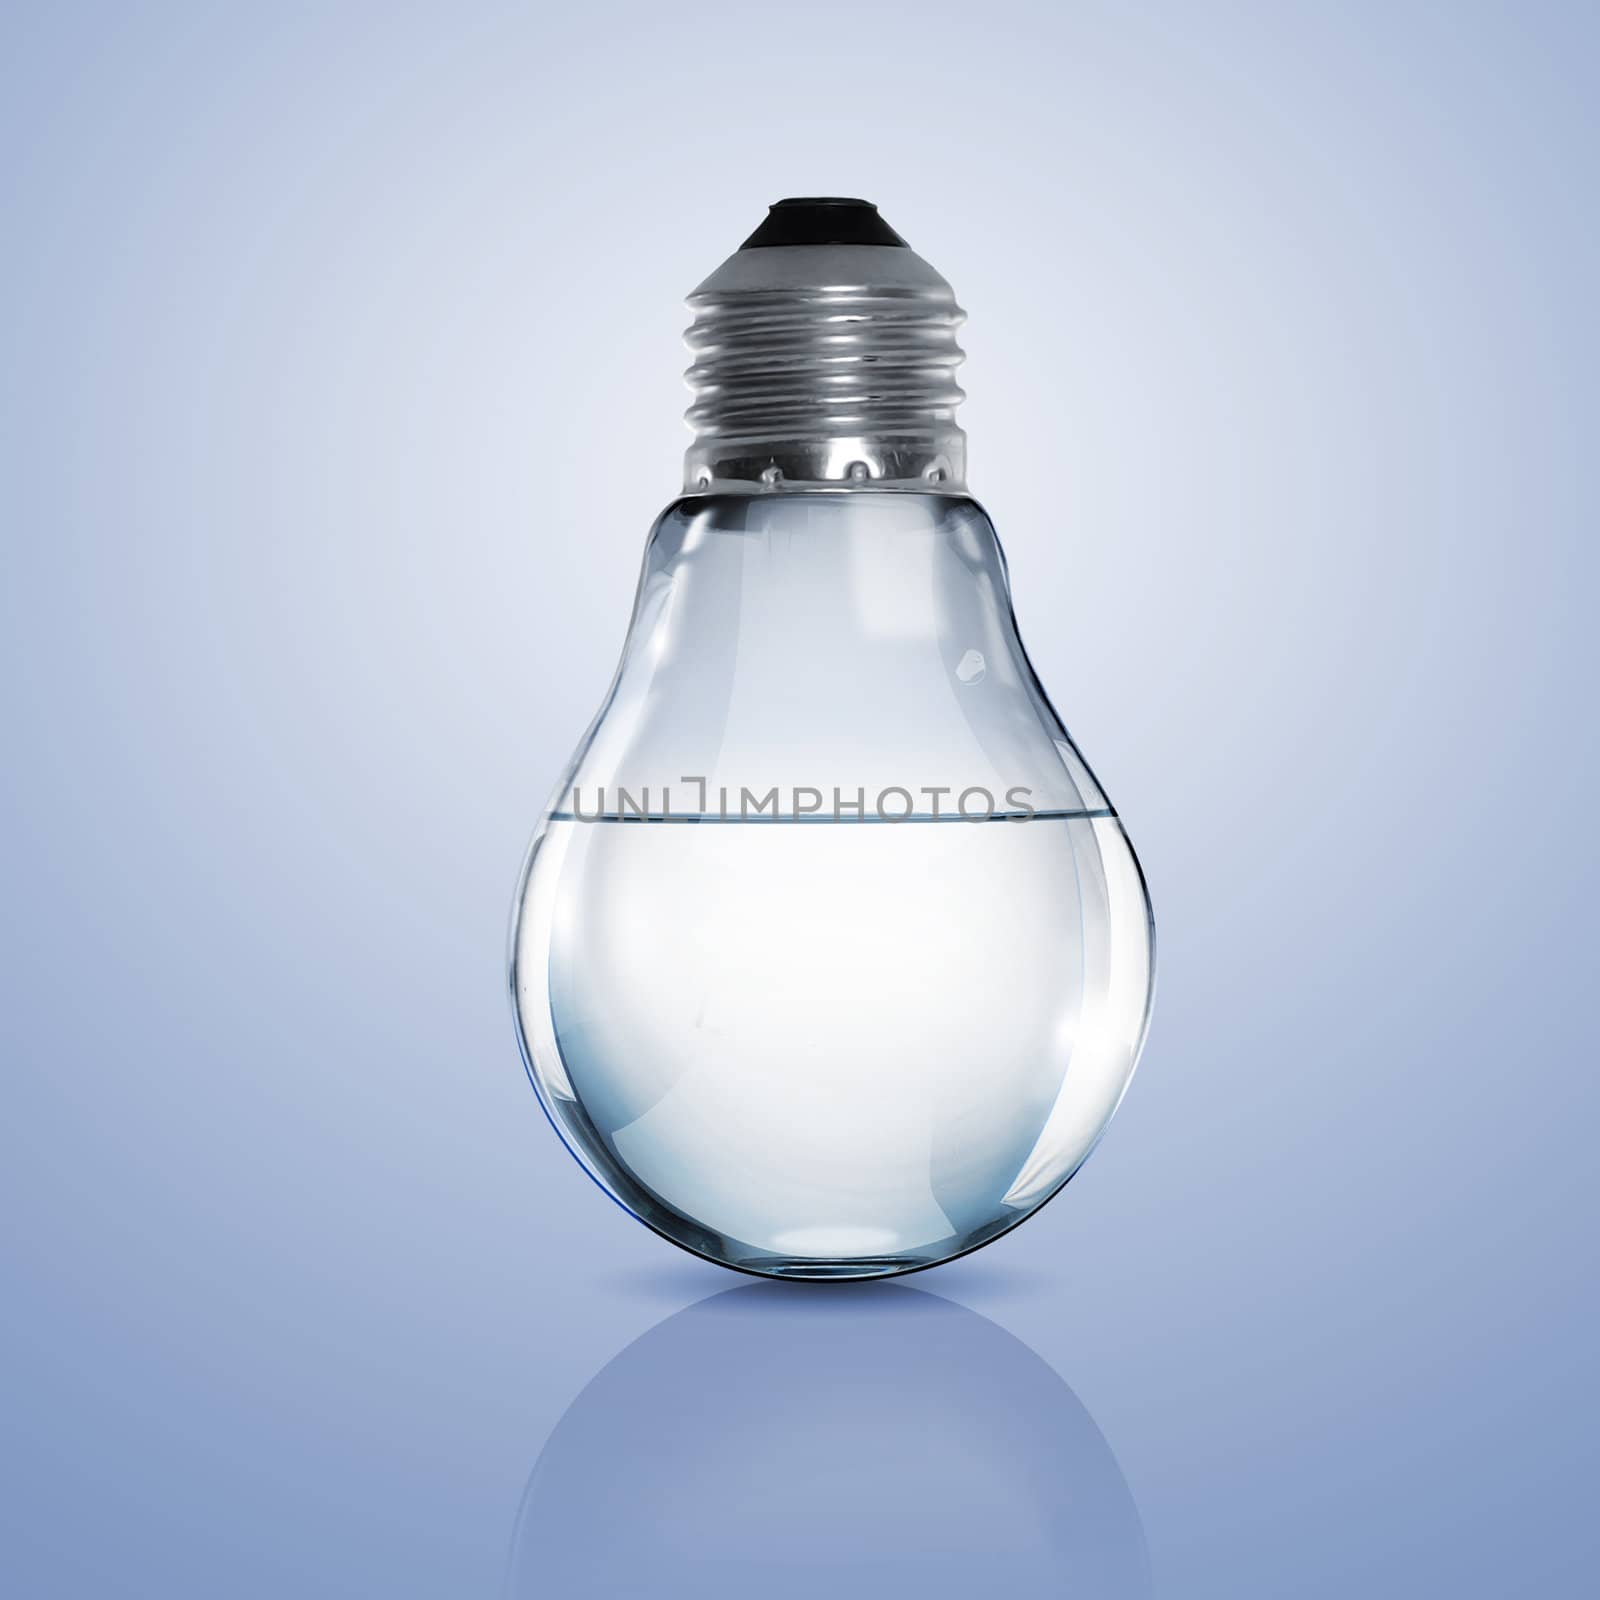 Electric light bulb with clean water by sergey_nivens